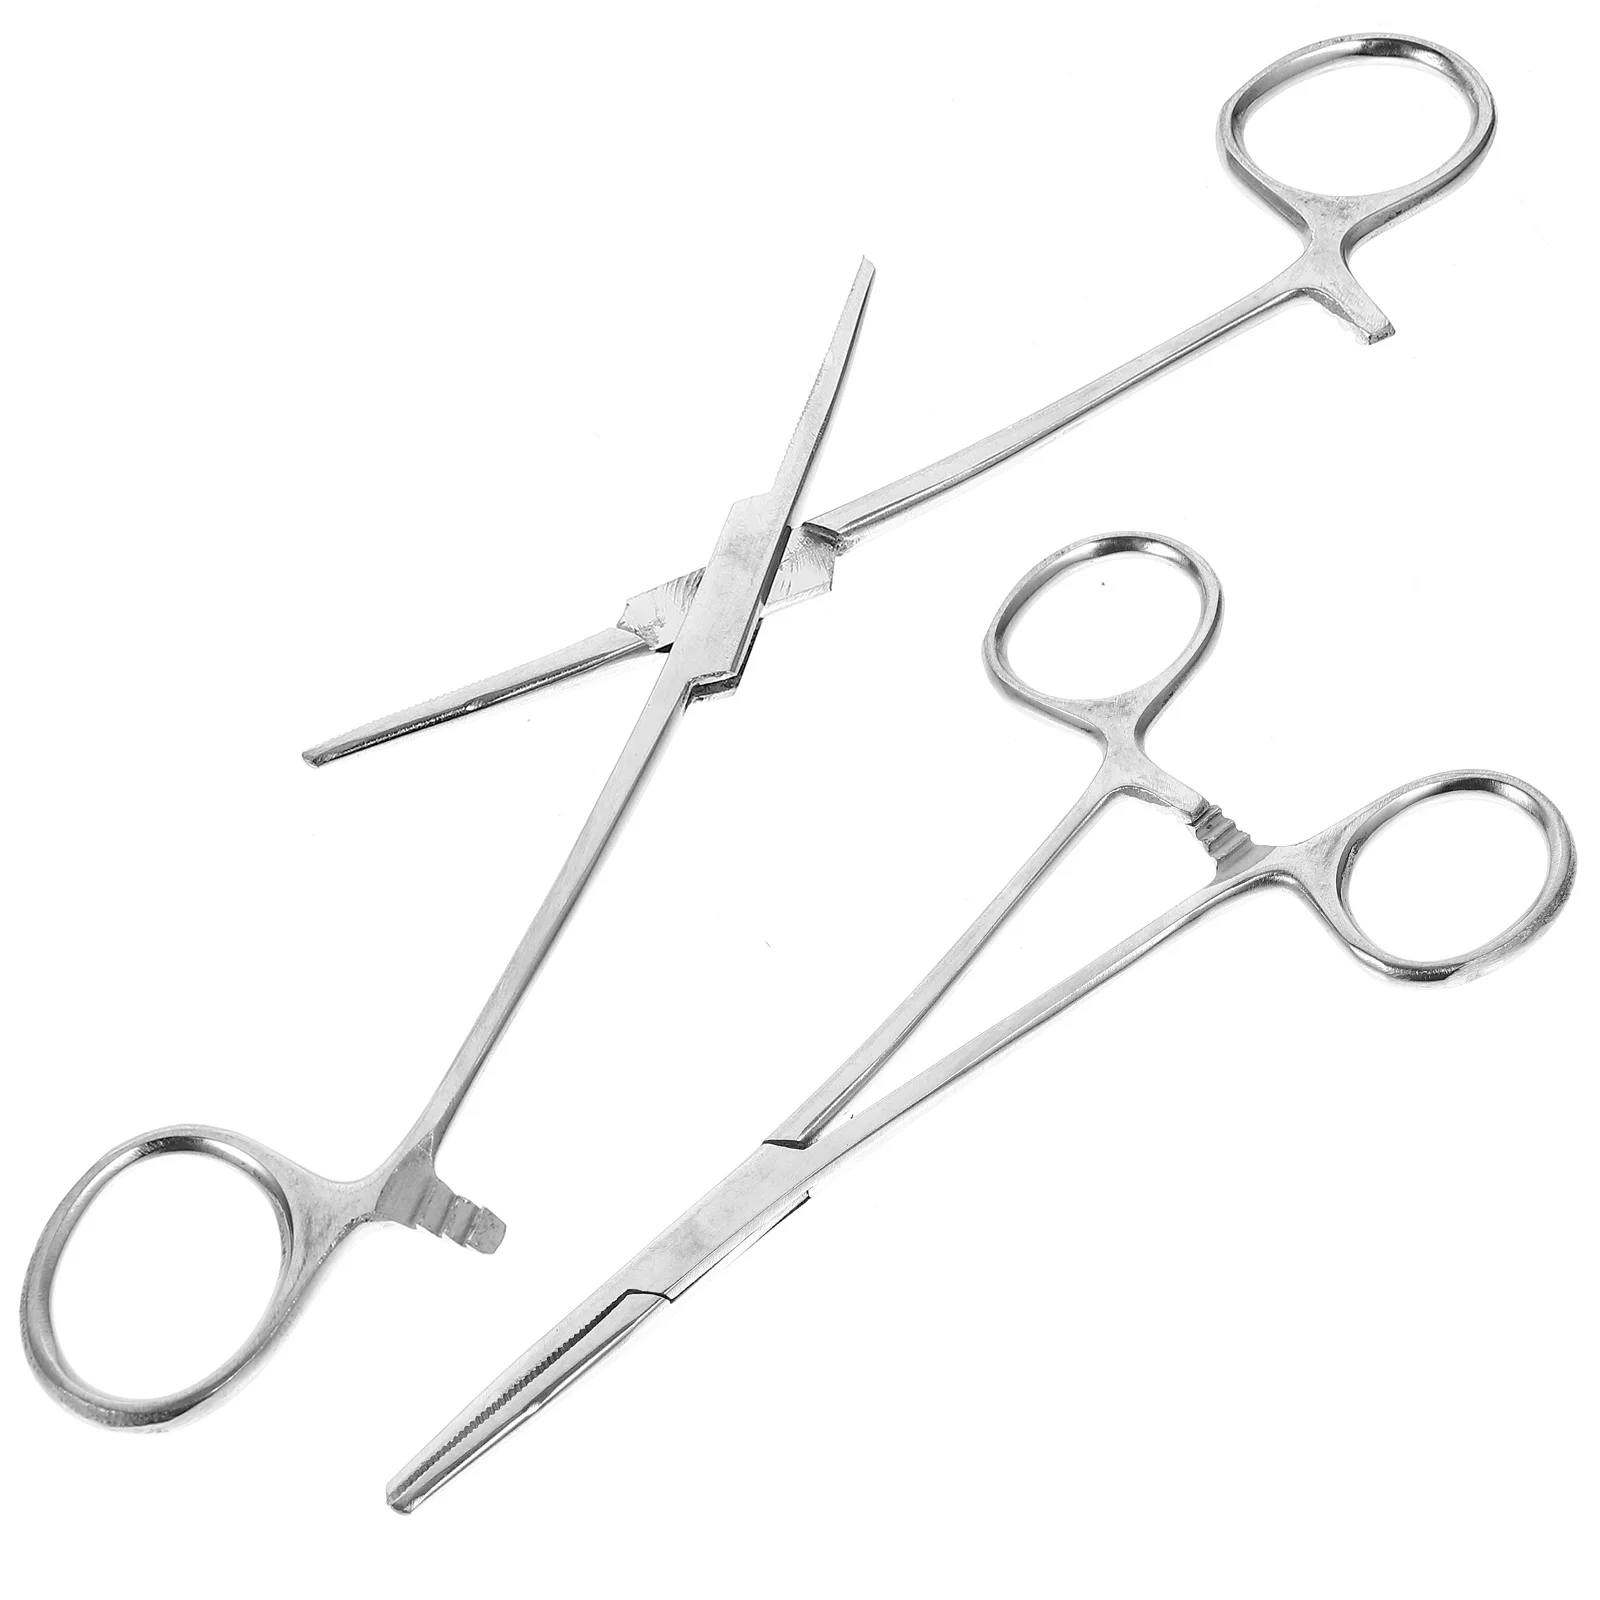 

2 Pcs Stainless Steel Tongs Pet Hair Pliers Cupping Tool Fishing Hook Wound Cleaning Forceps Home Hemostatic Nurse